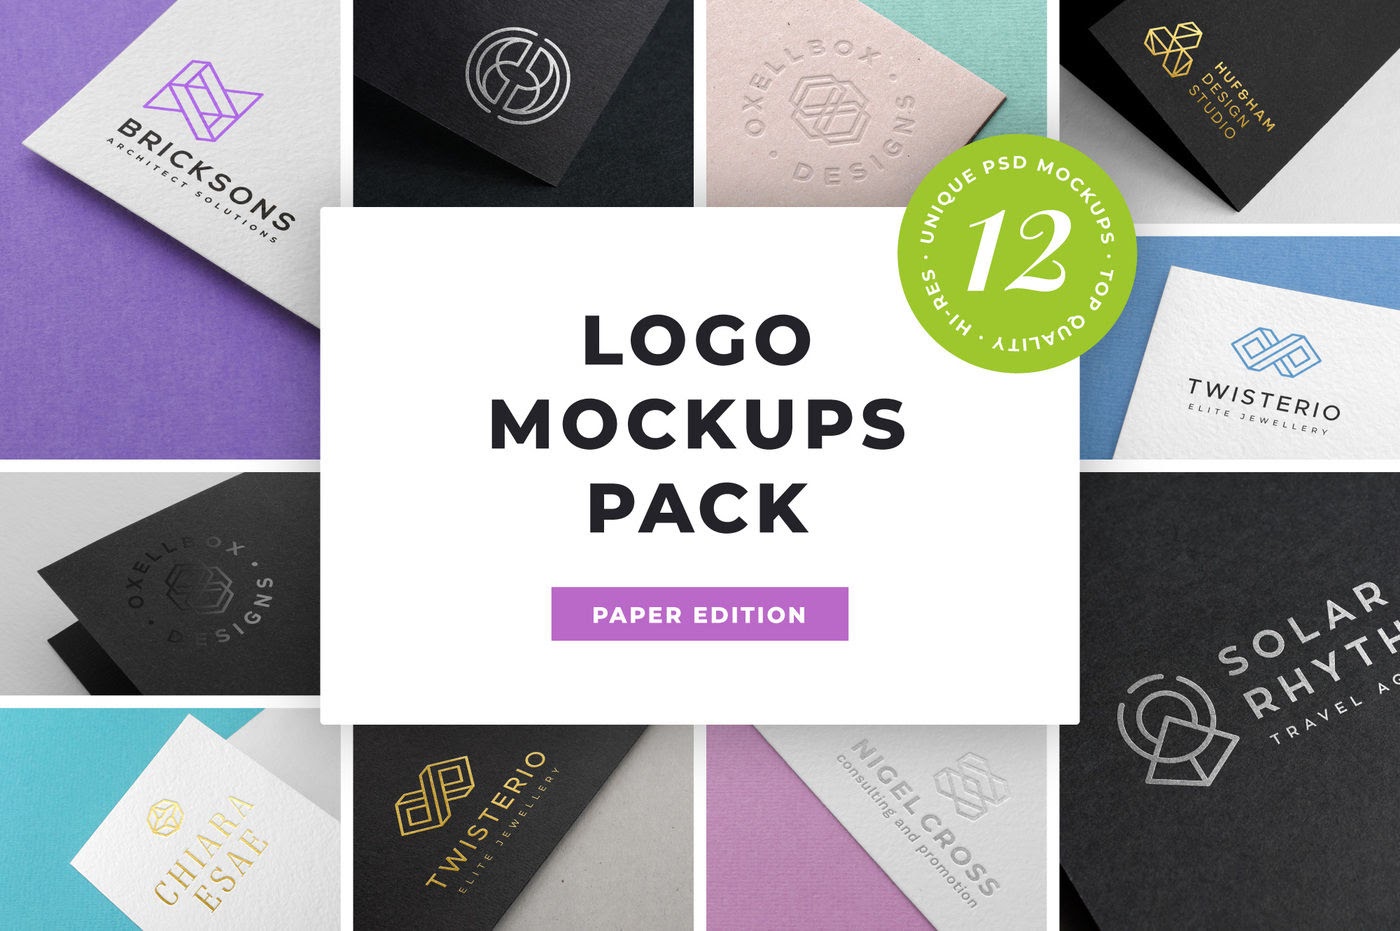 Download Free 1368+ Yellow Pages Mockup Yellowimages Mockups for Cricut, Silhouette and Other Machine